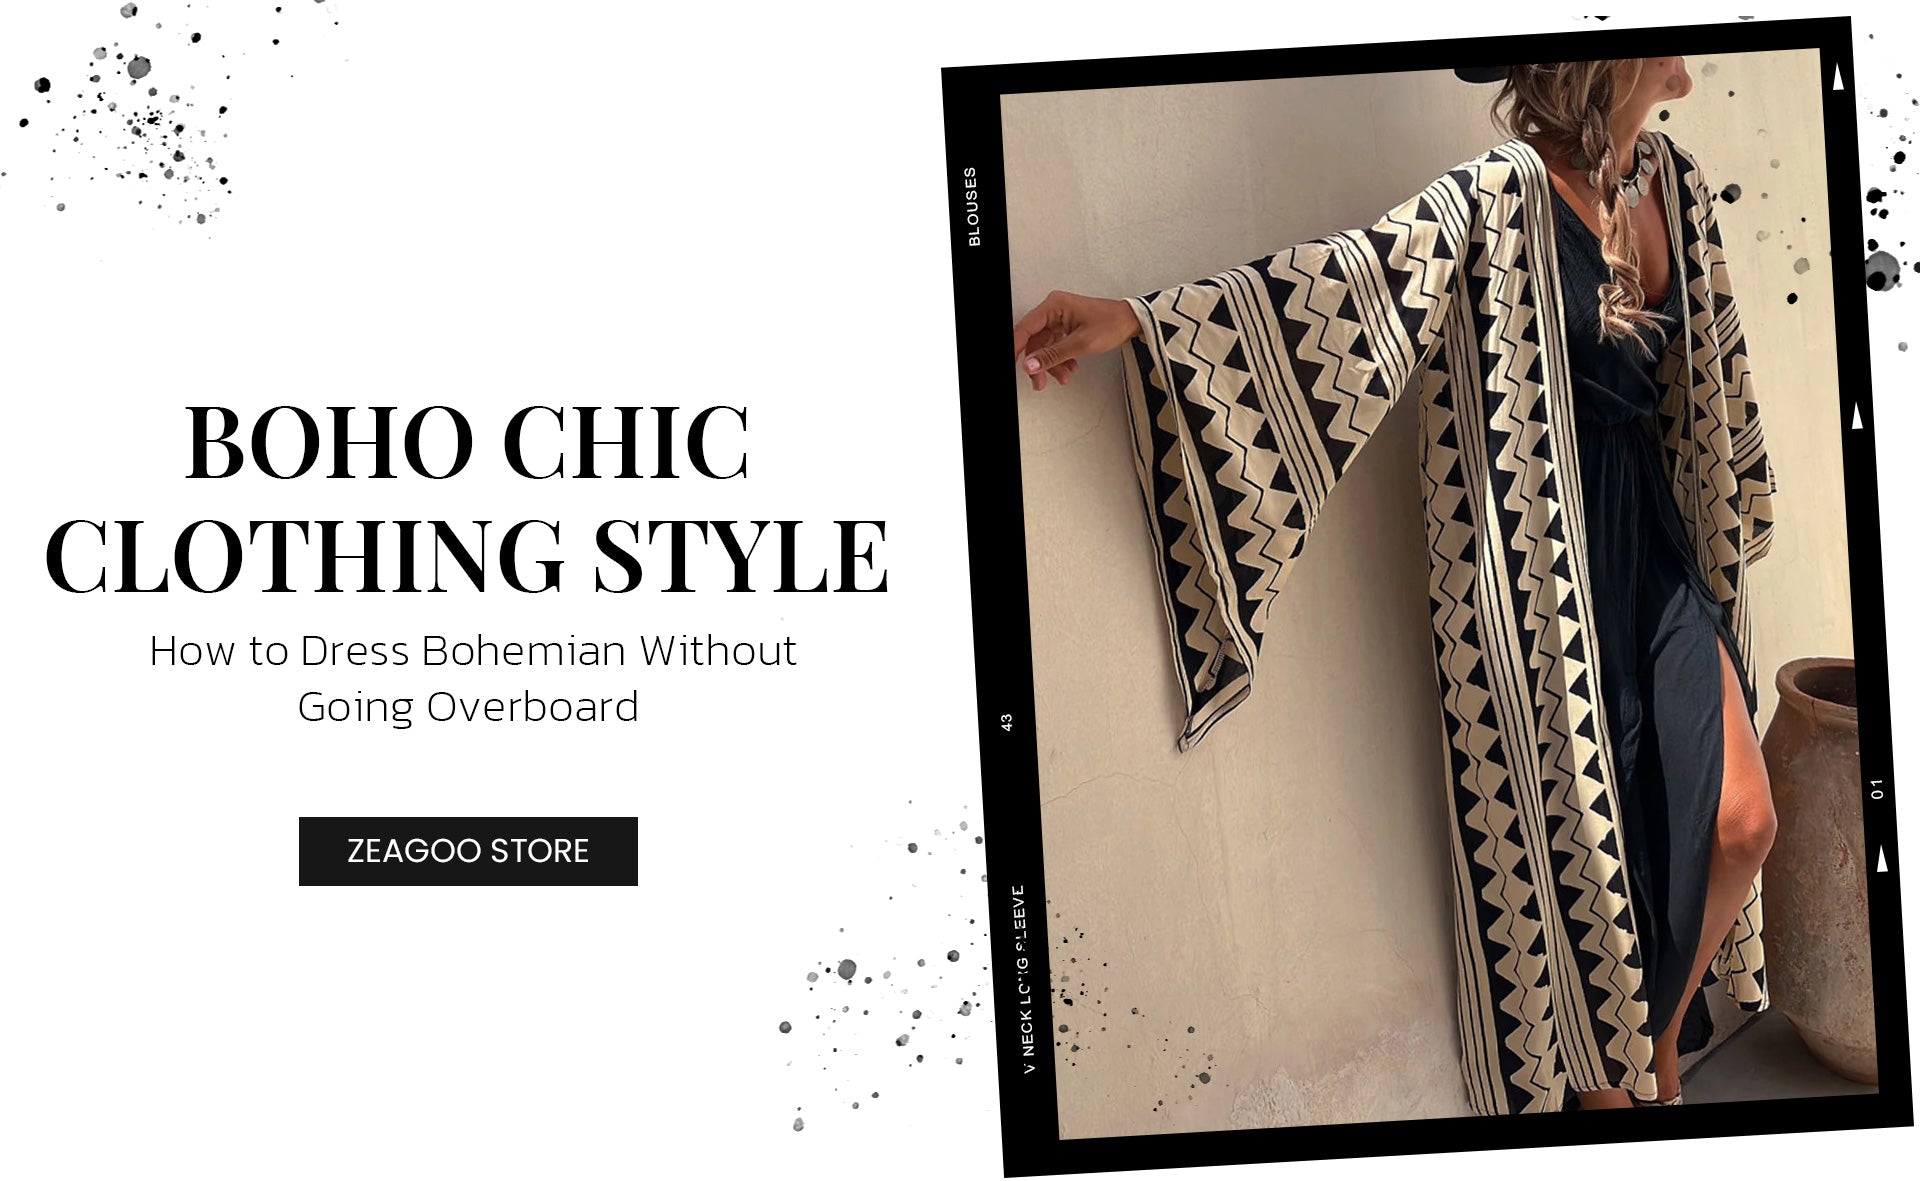 Boho Chic Clothing Style: How to Dress Bohemian Without Going Overboard